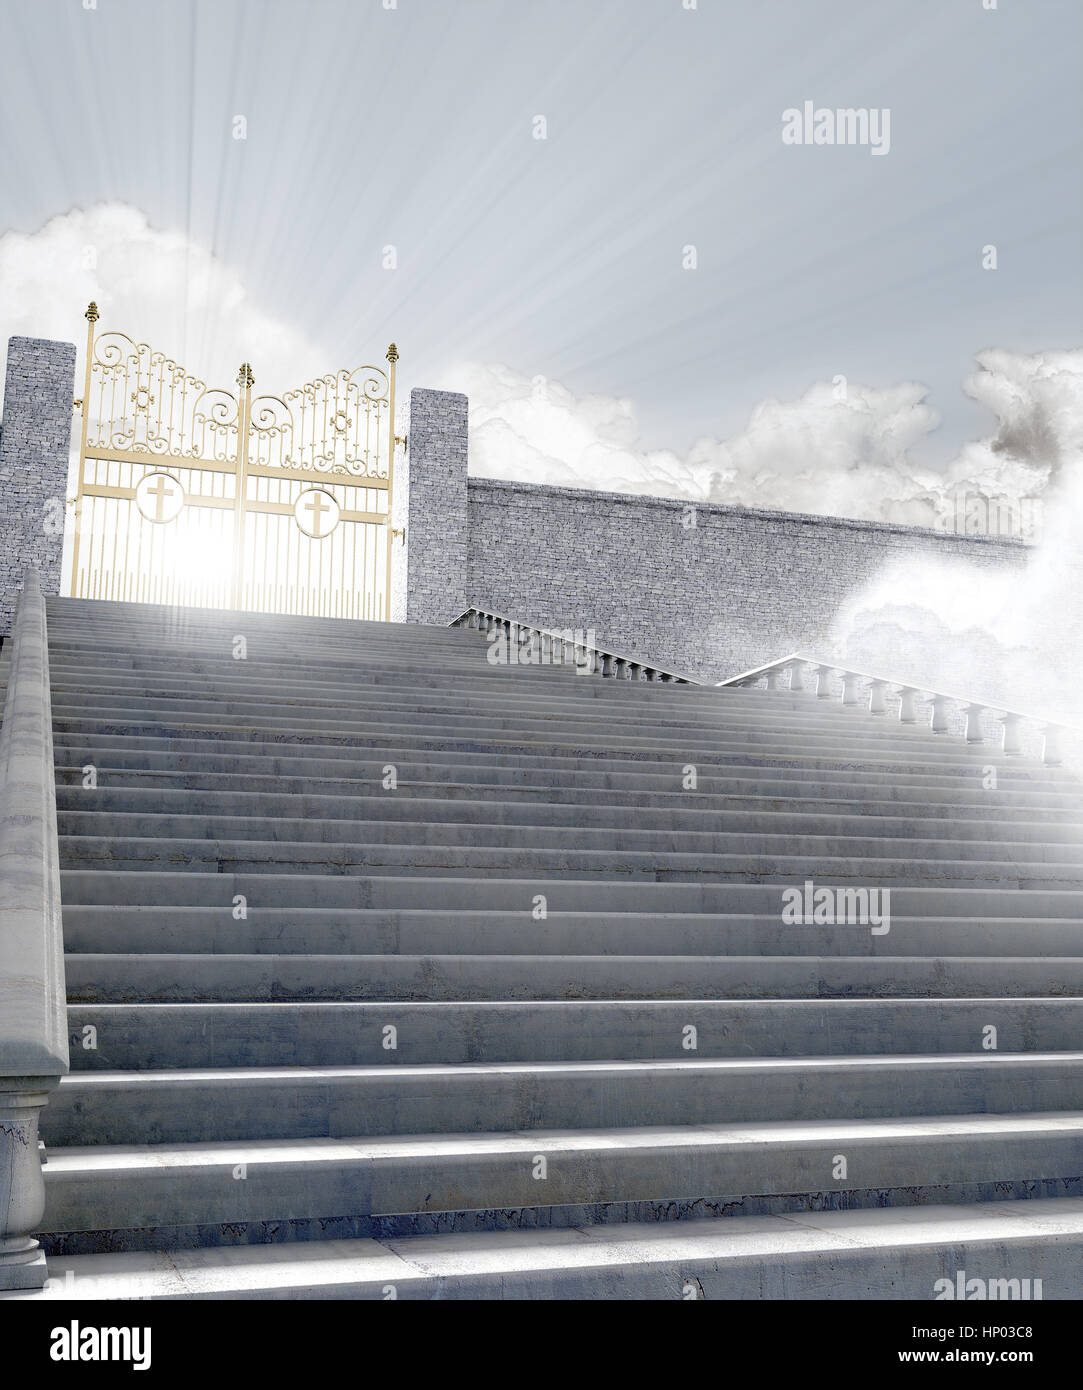 A concept depicting the majestic pearly gates of heaven surrounded by clouds and the staircase leading up to them - 3D render Stock Photo